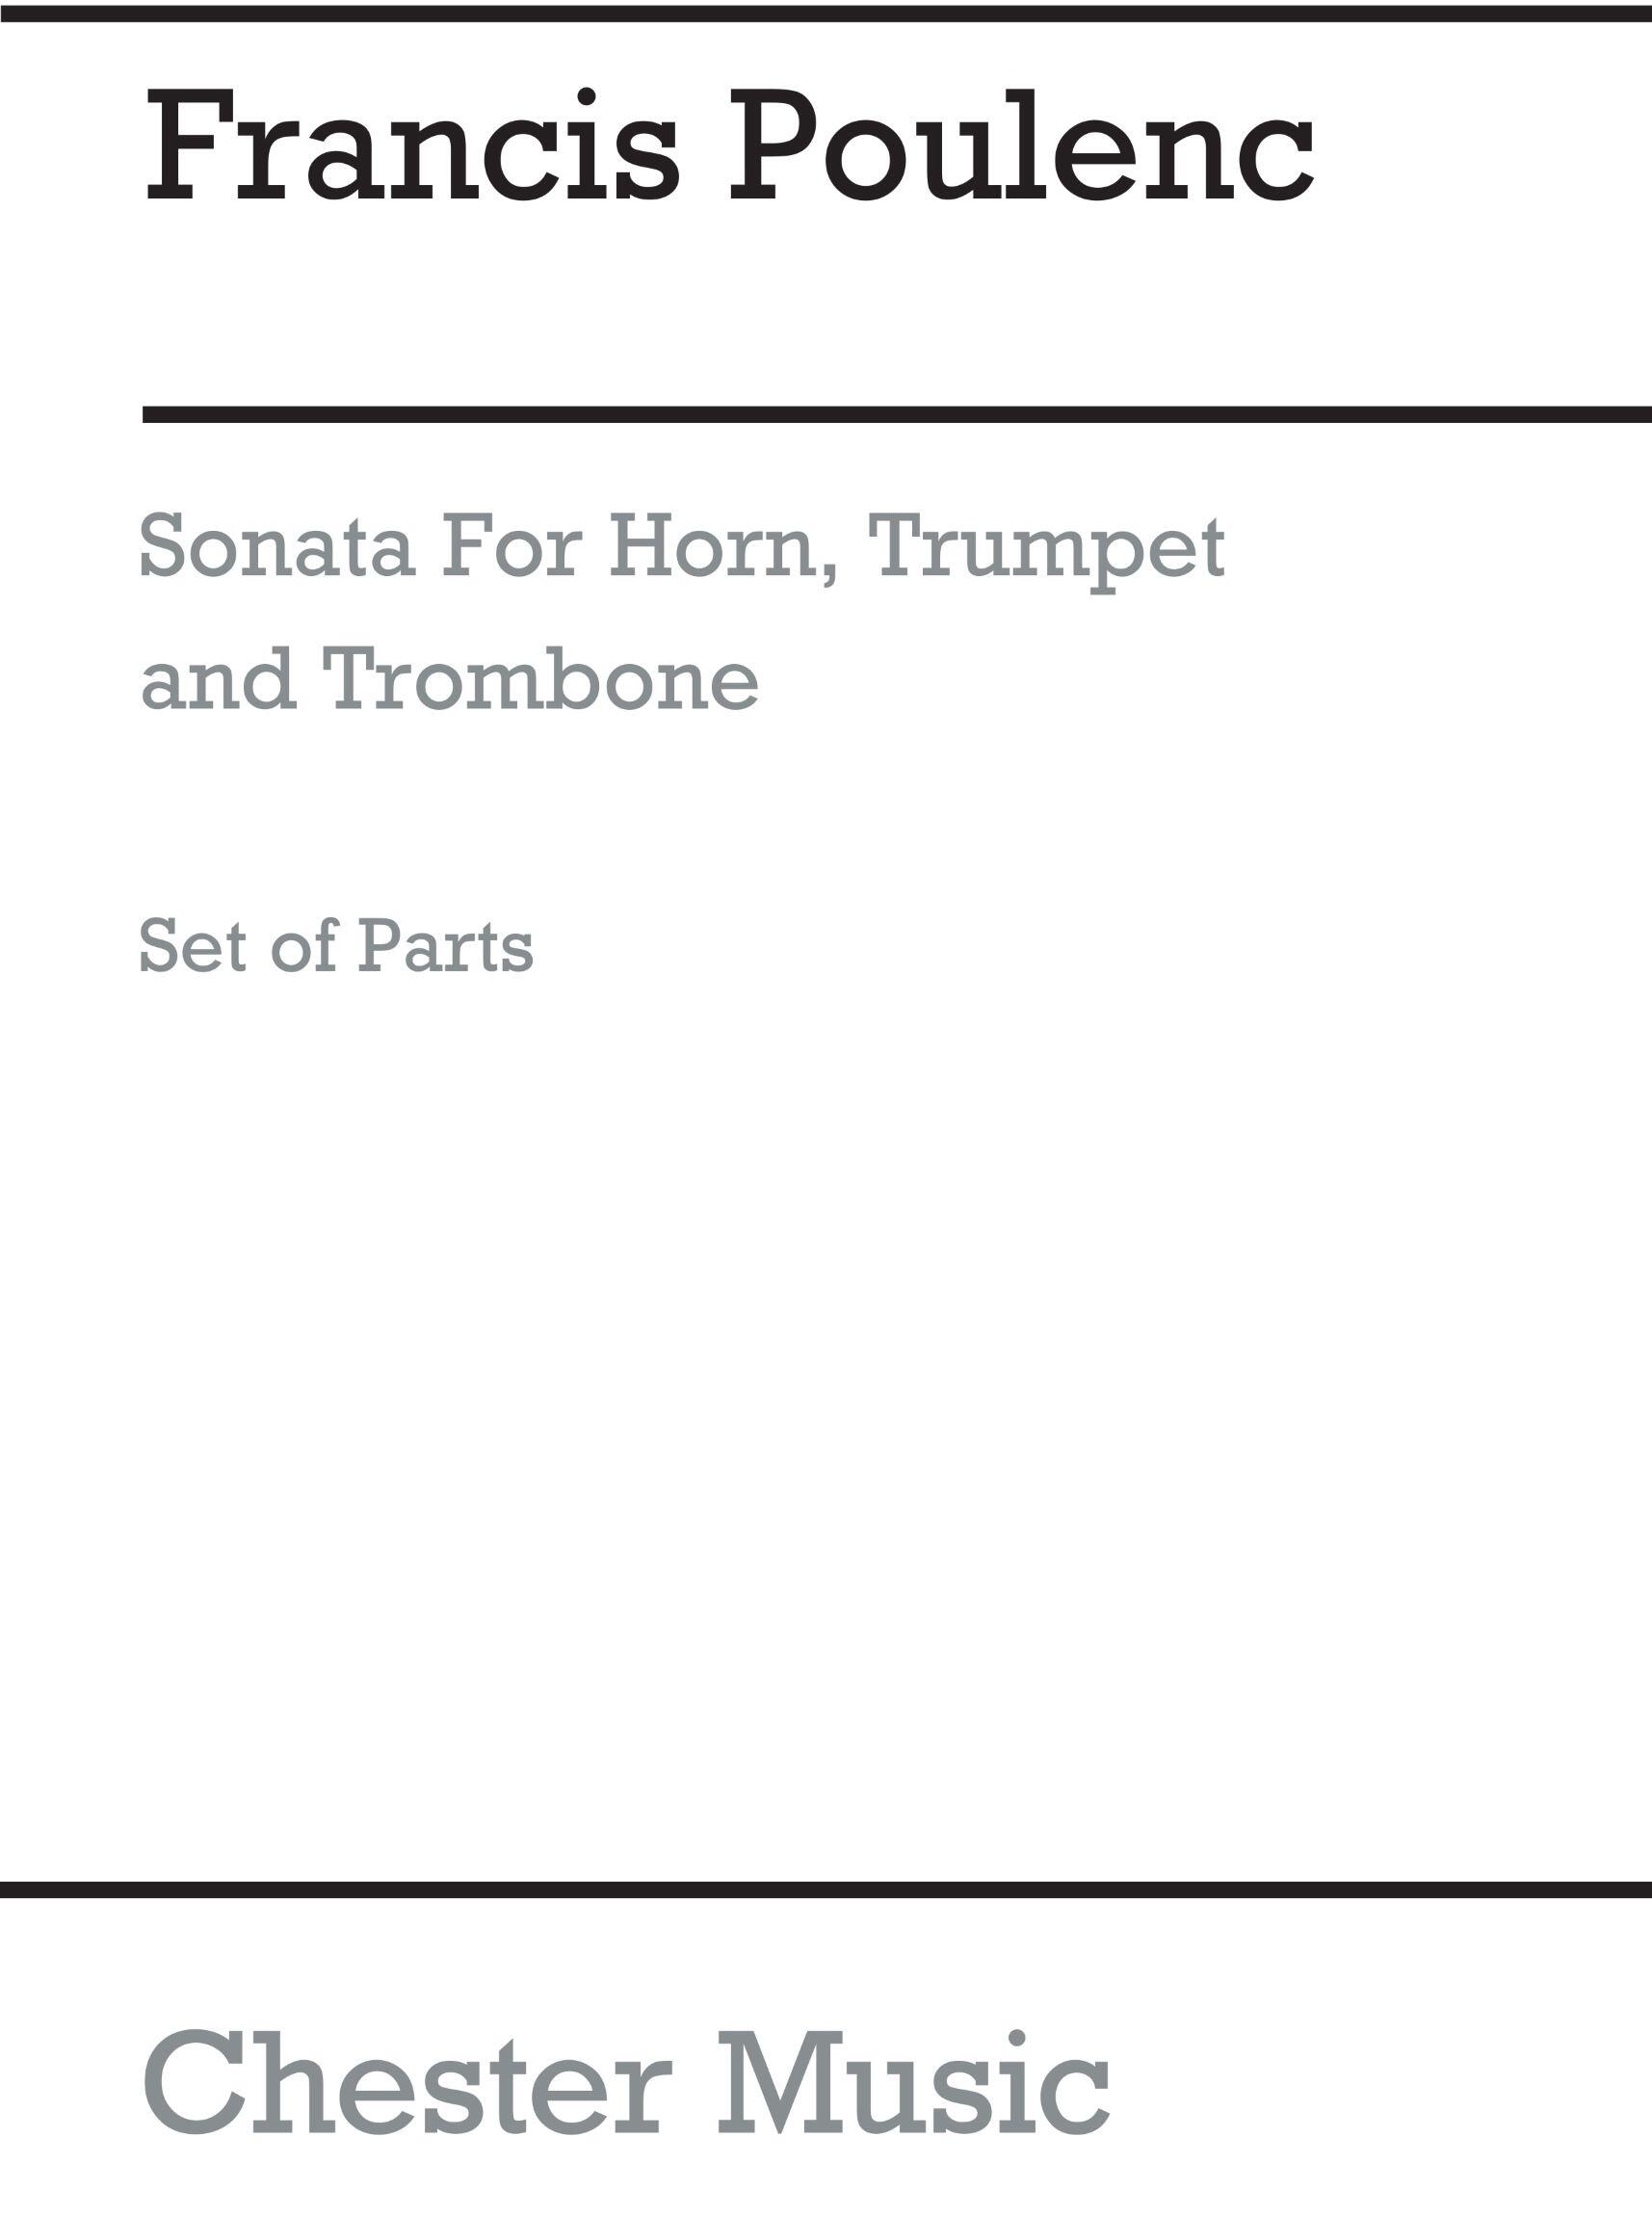 Sonata For Horn, Trumpet and Trombone (Parts) : photo 1